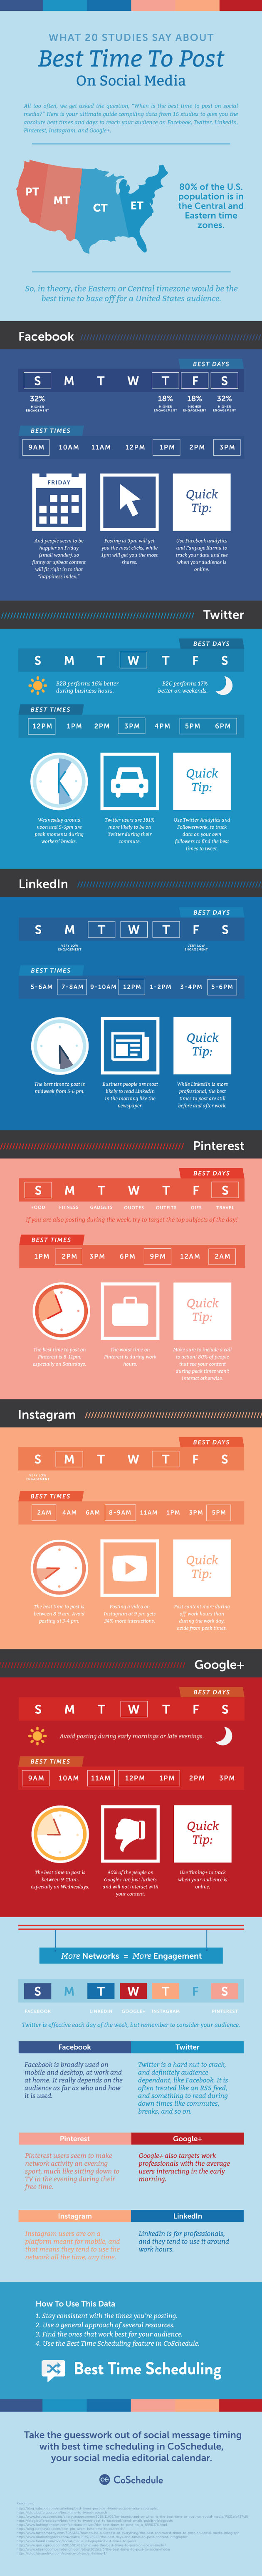 170814-infographic-best-times-to-post-on-social-small